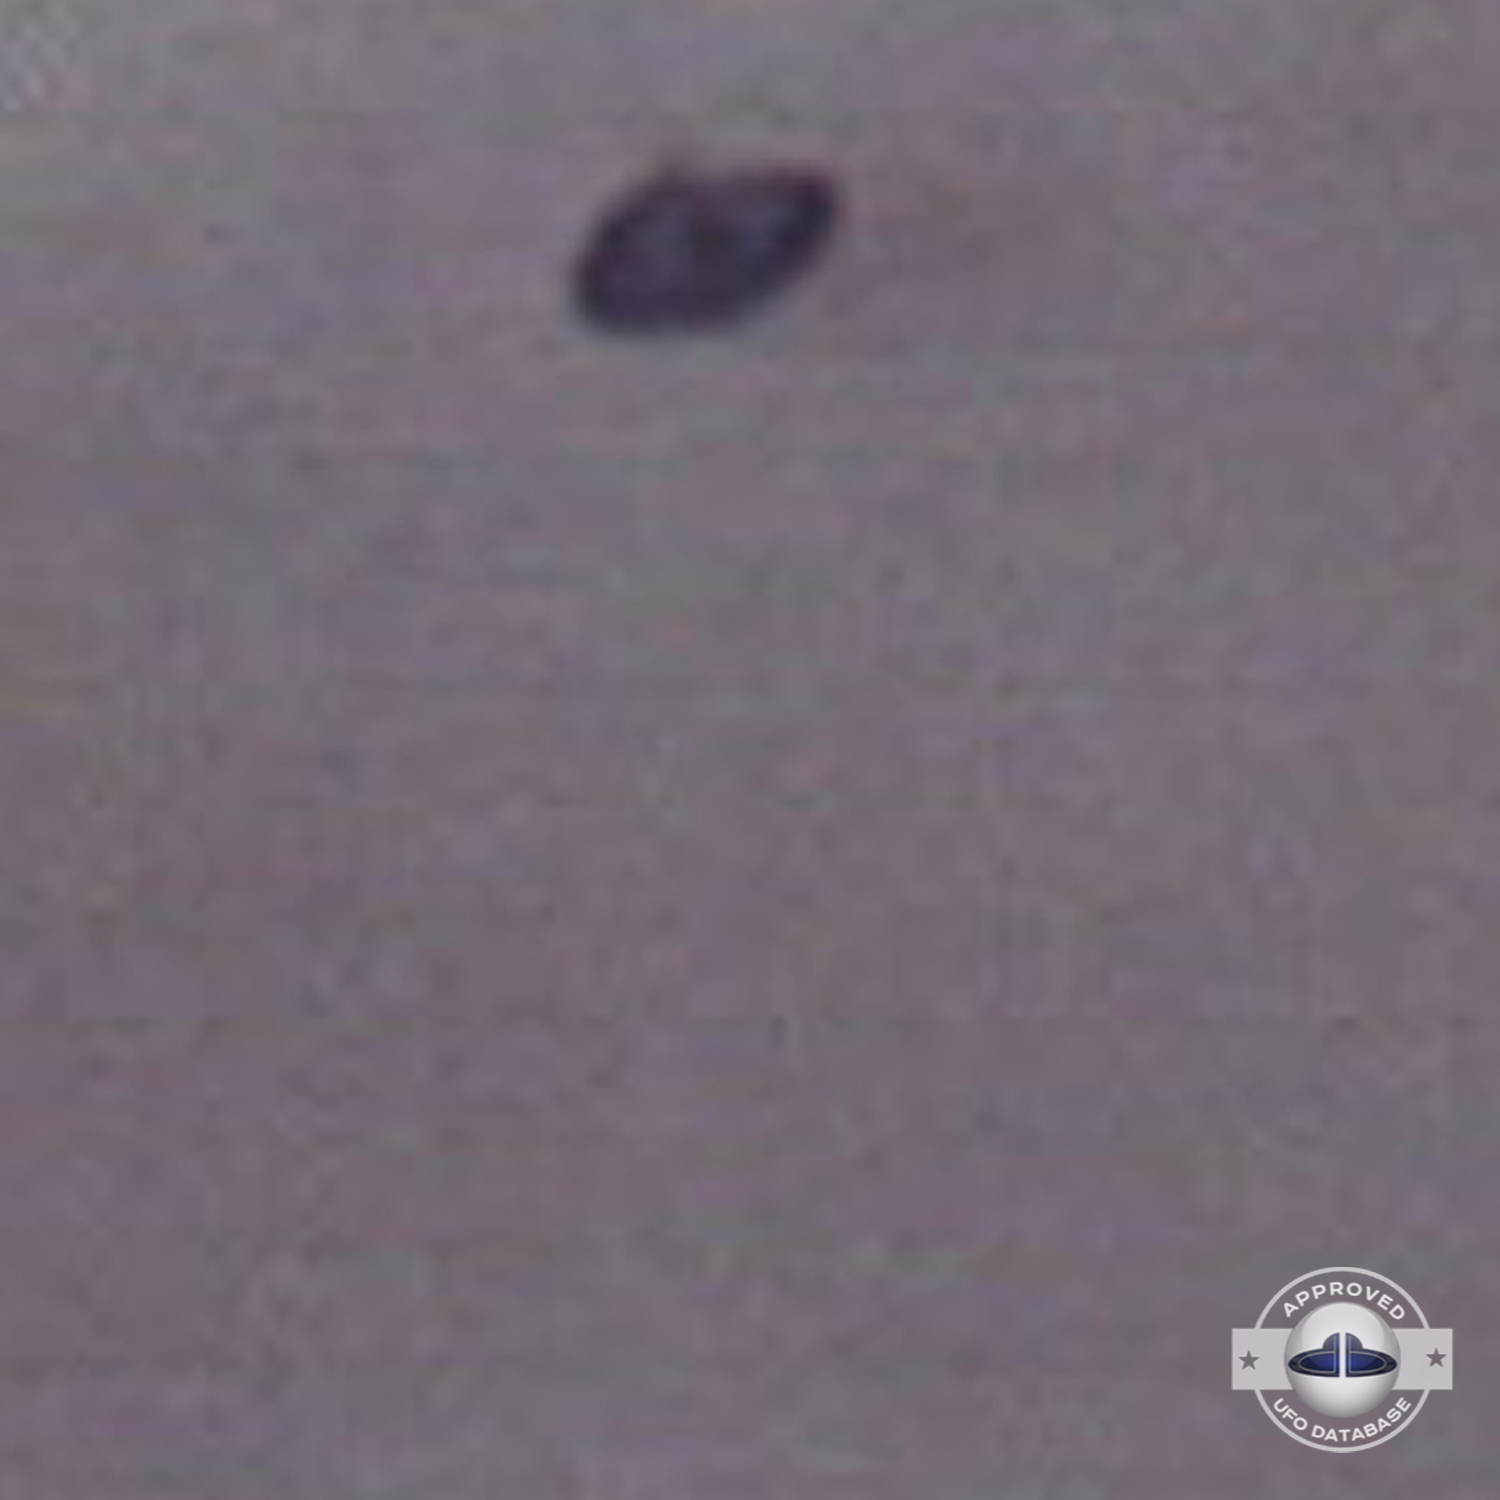 Unidentified flying object is flying over a building with antennas UFO Picture #59-3